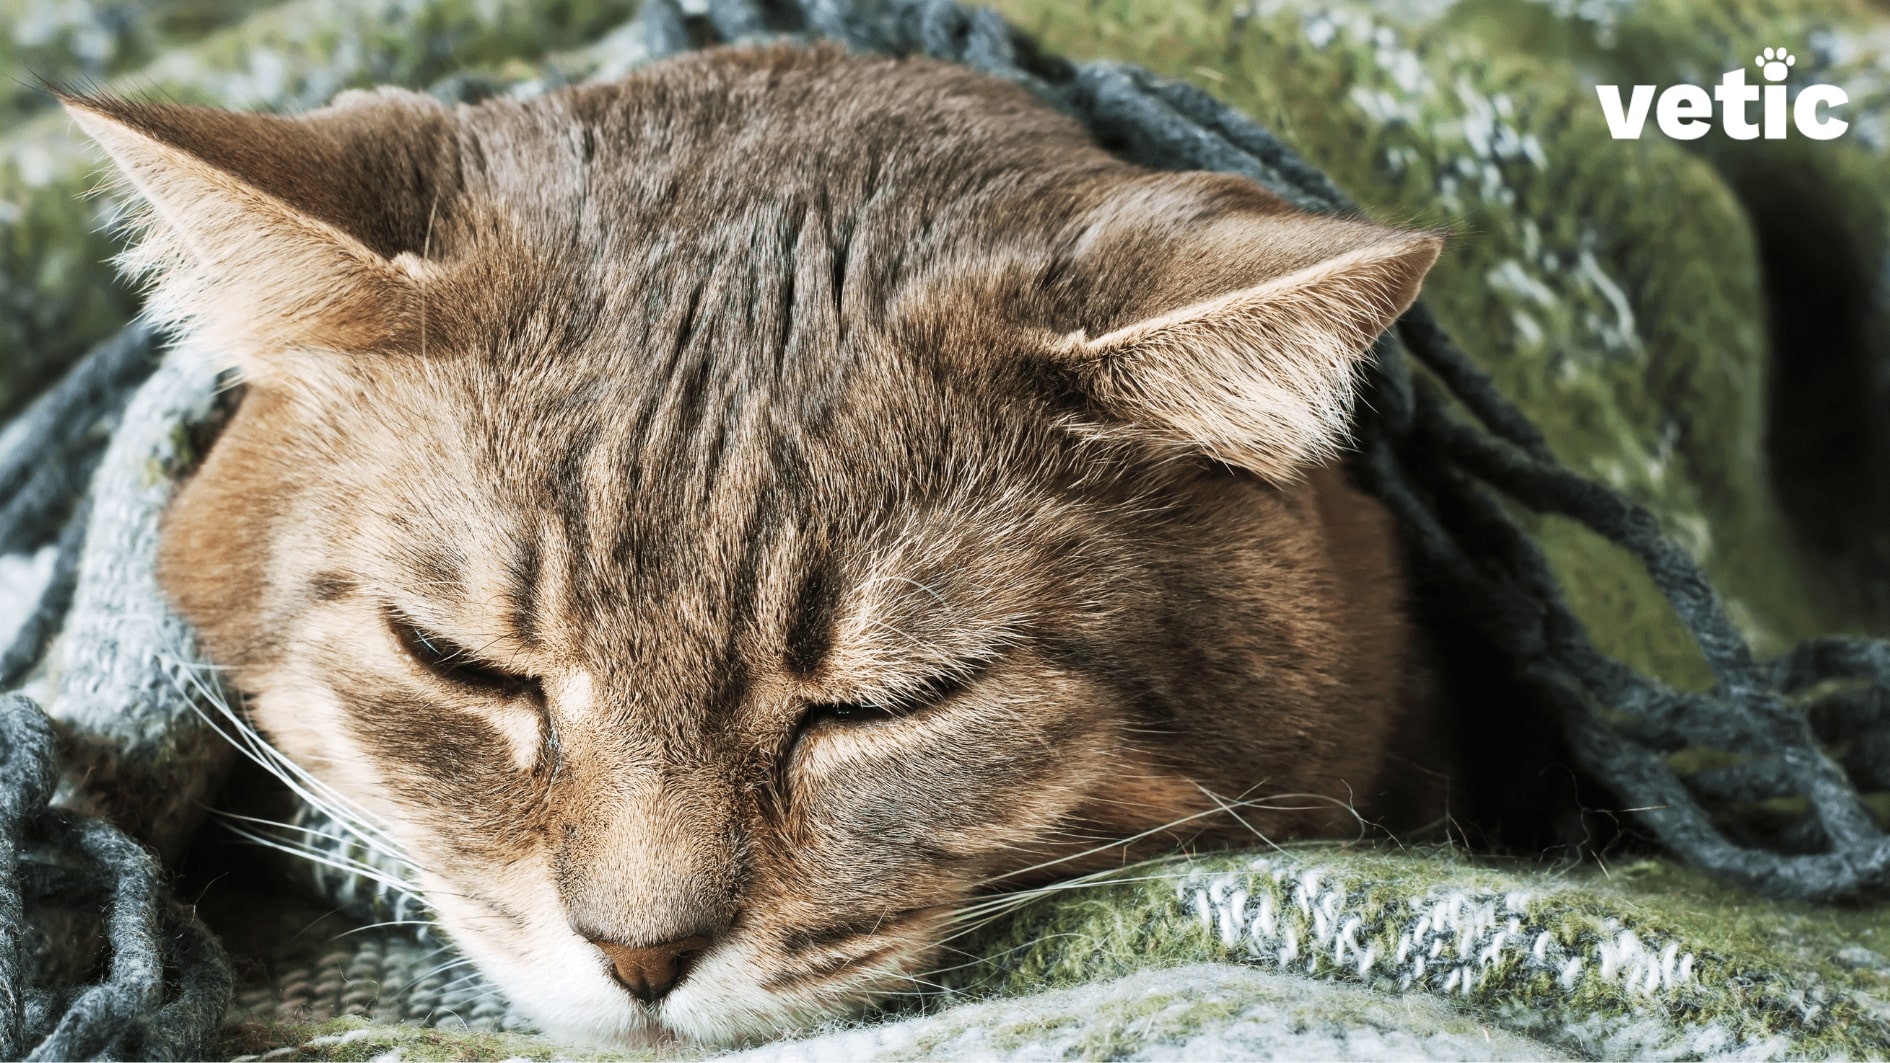 Mackerel cat sleeping under a green blanket with just head sticking out. Lethargy is a common sign of haemoprotozoa in cats